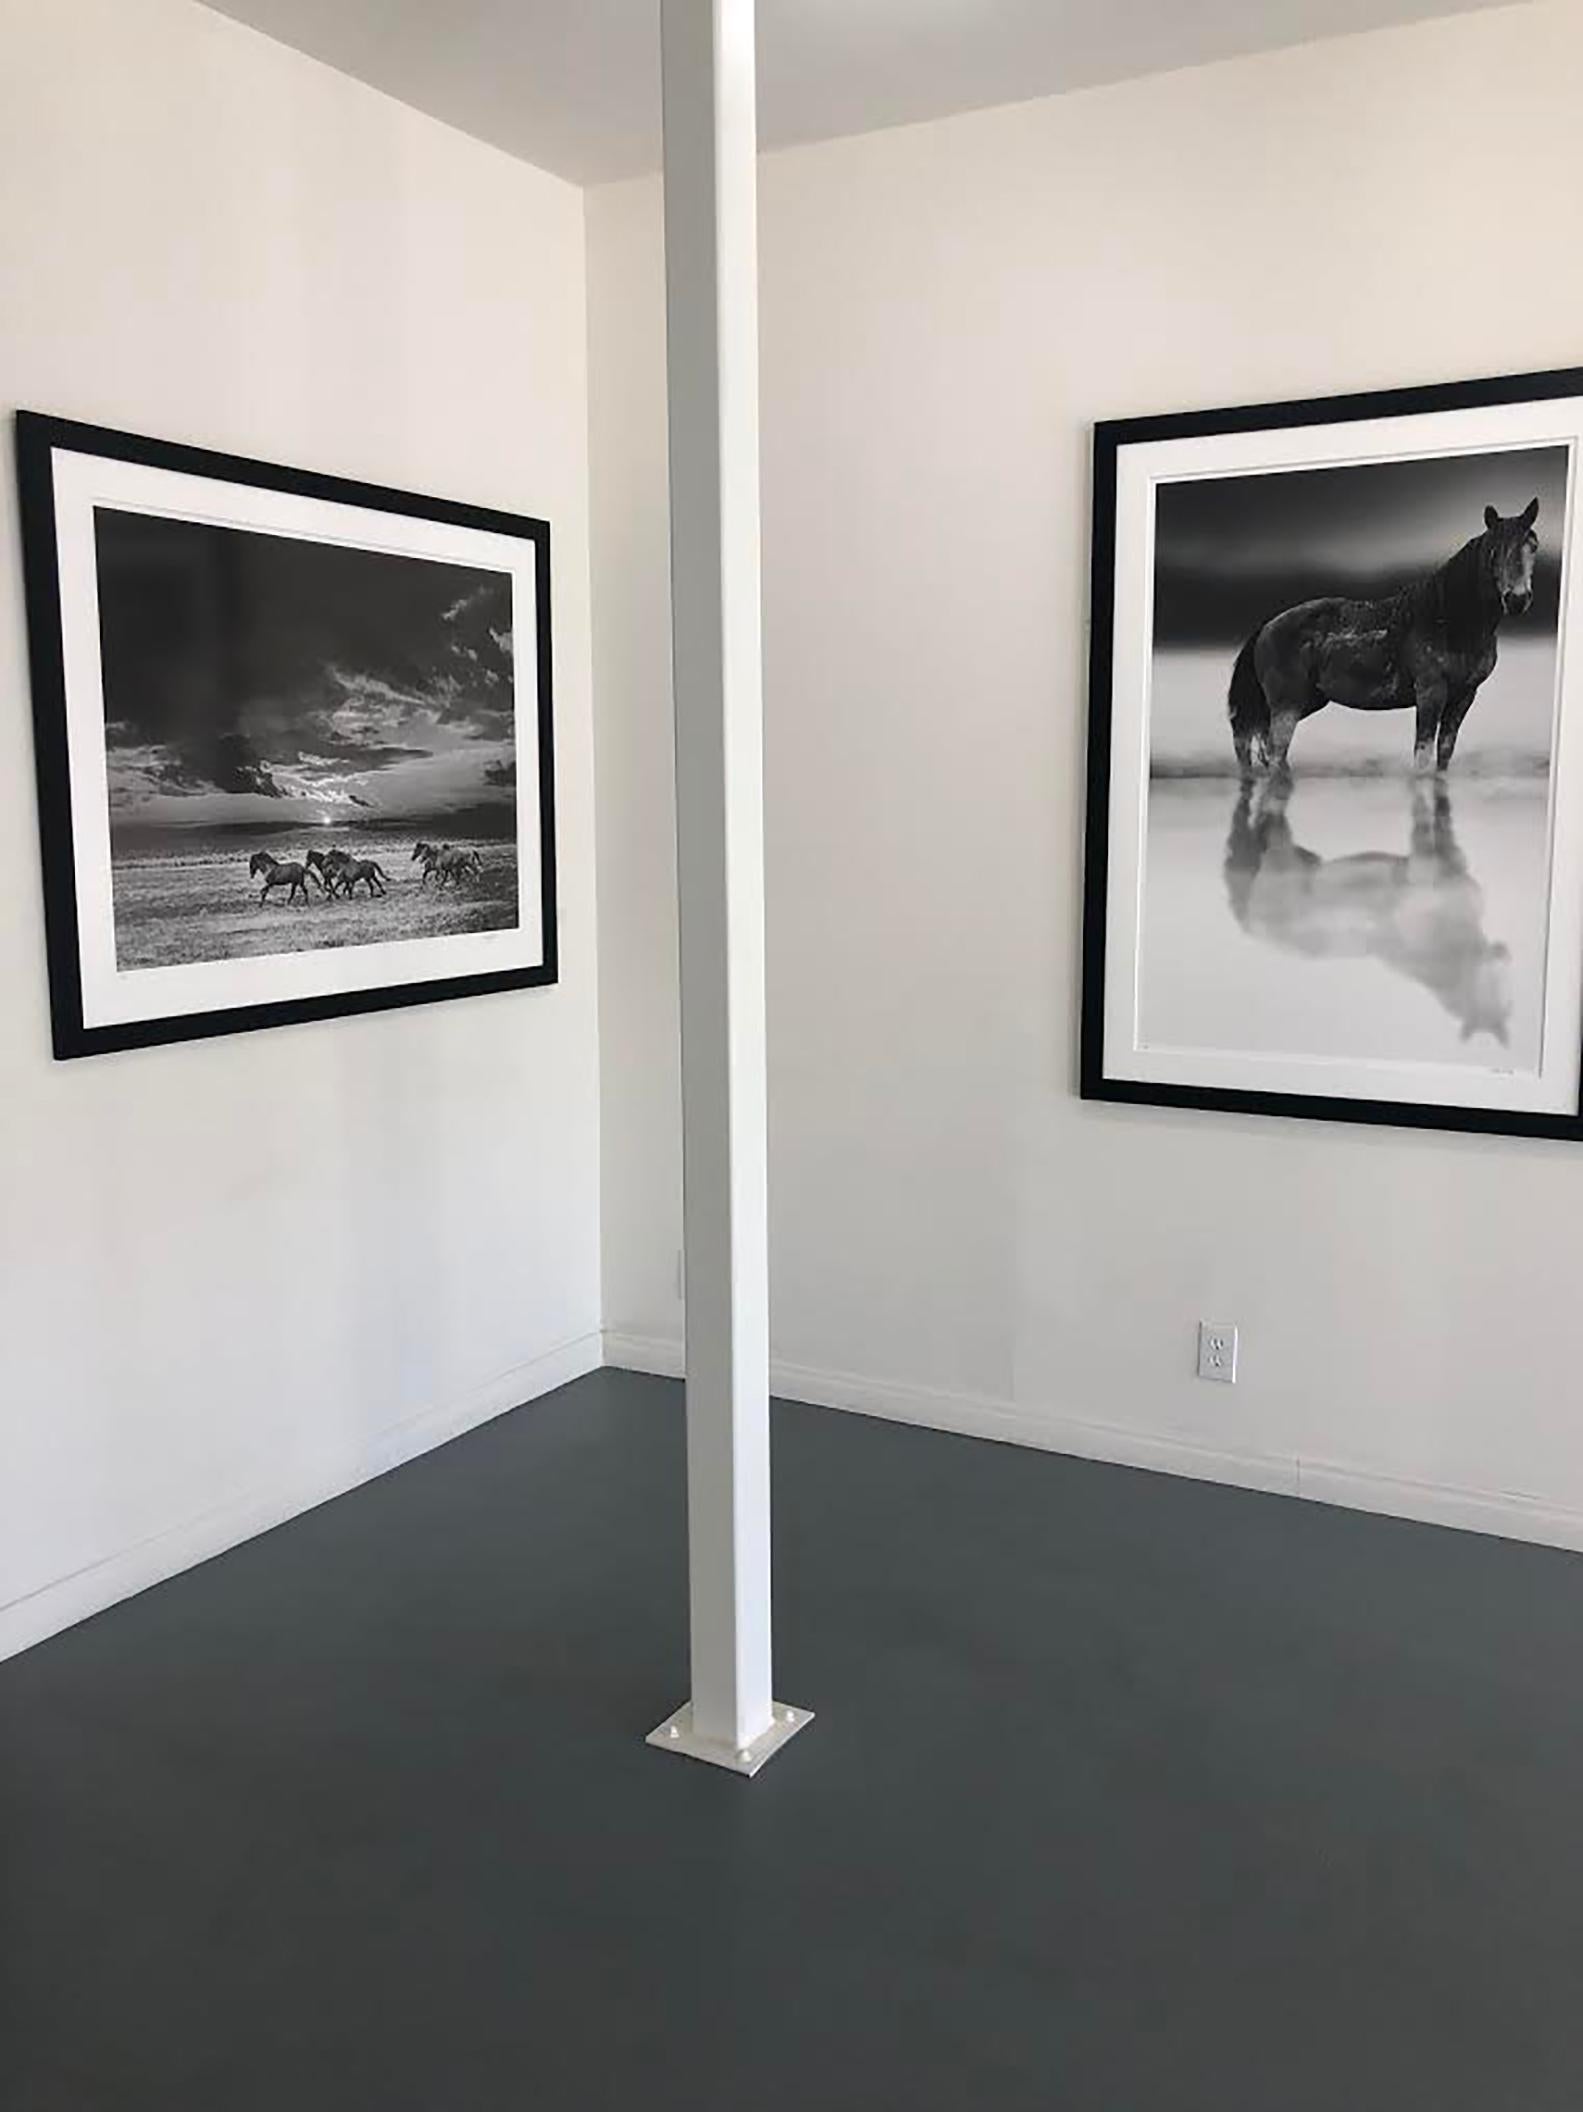 Chasing the Light 36x48 Mustangs Photography of Wild Horses Unsigned Photograph - Gray Black and White Photograph by Shane Russeck